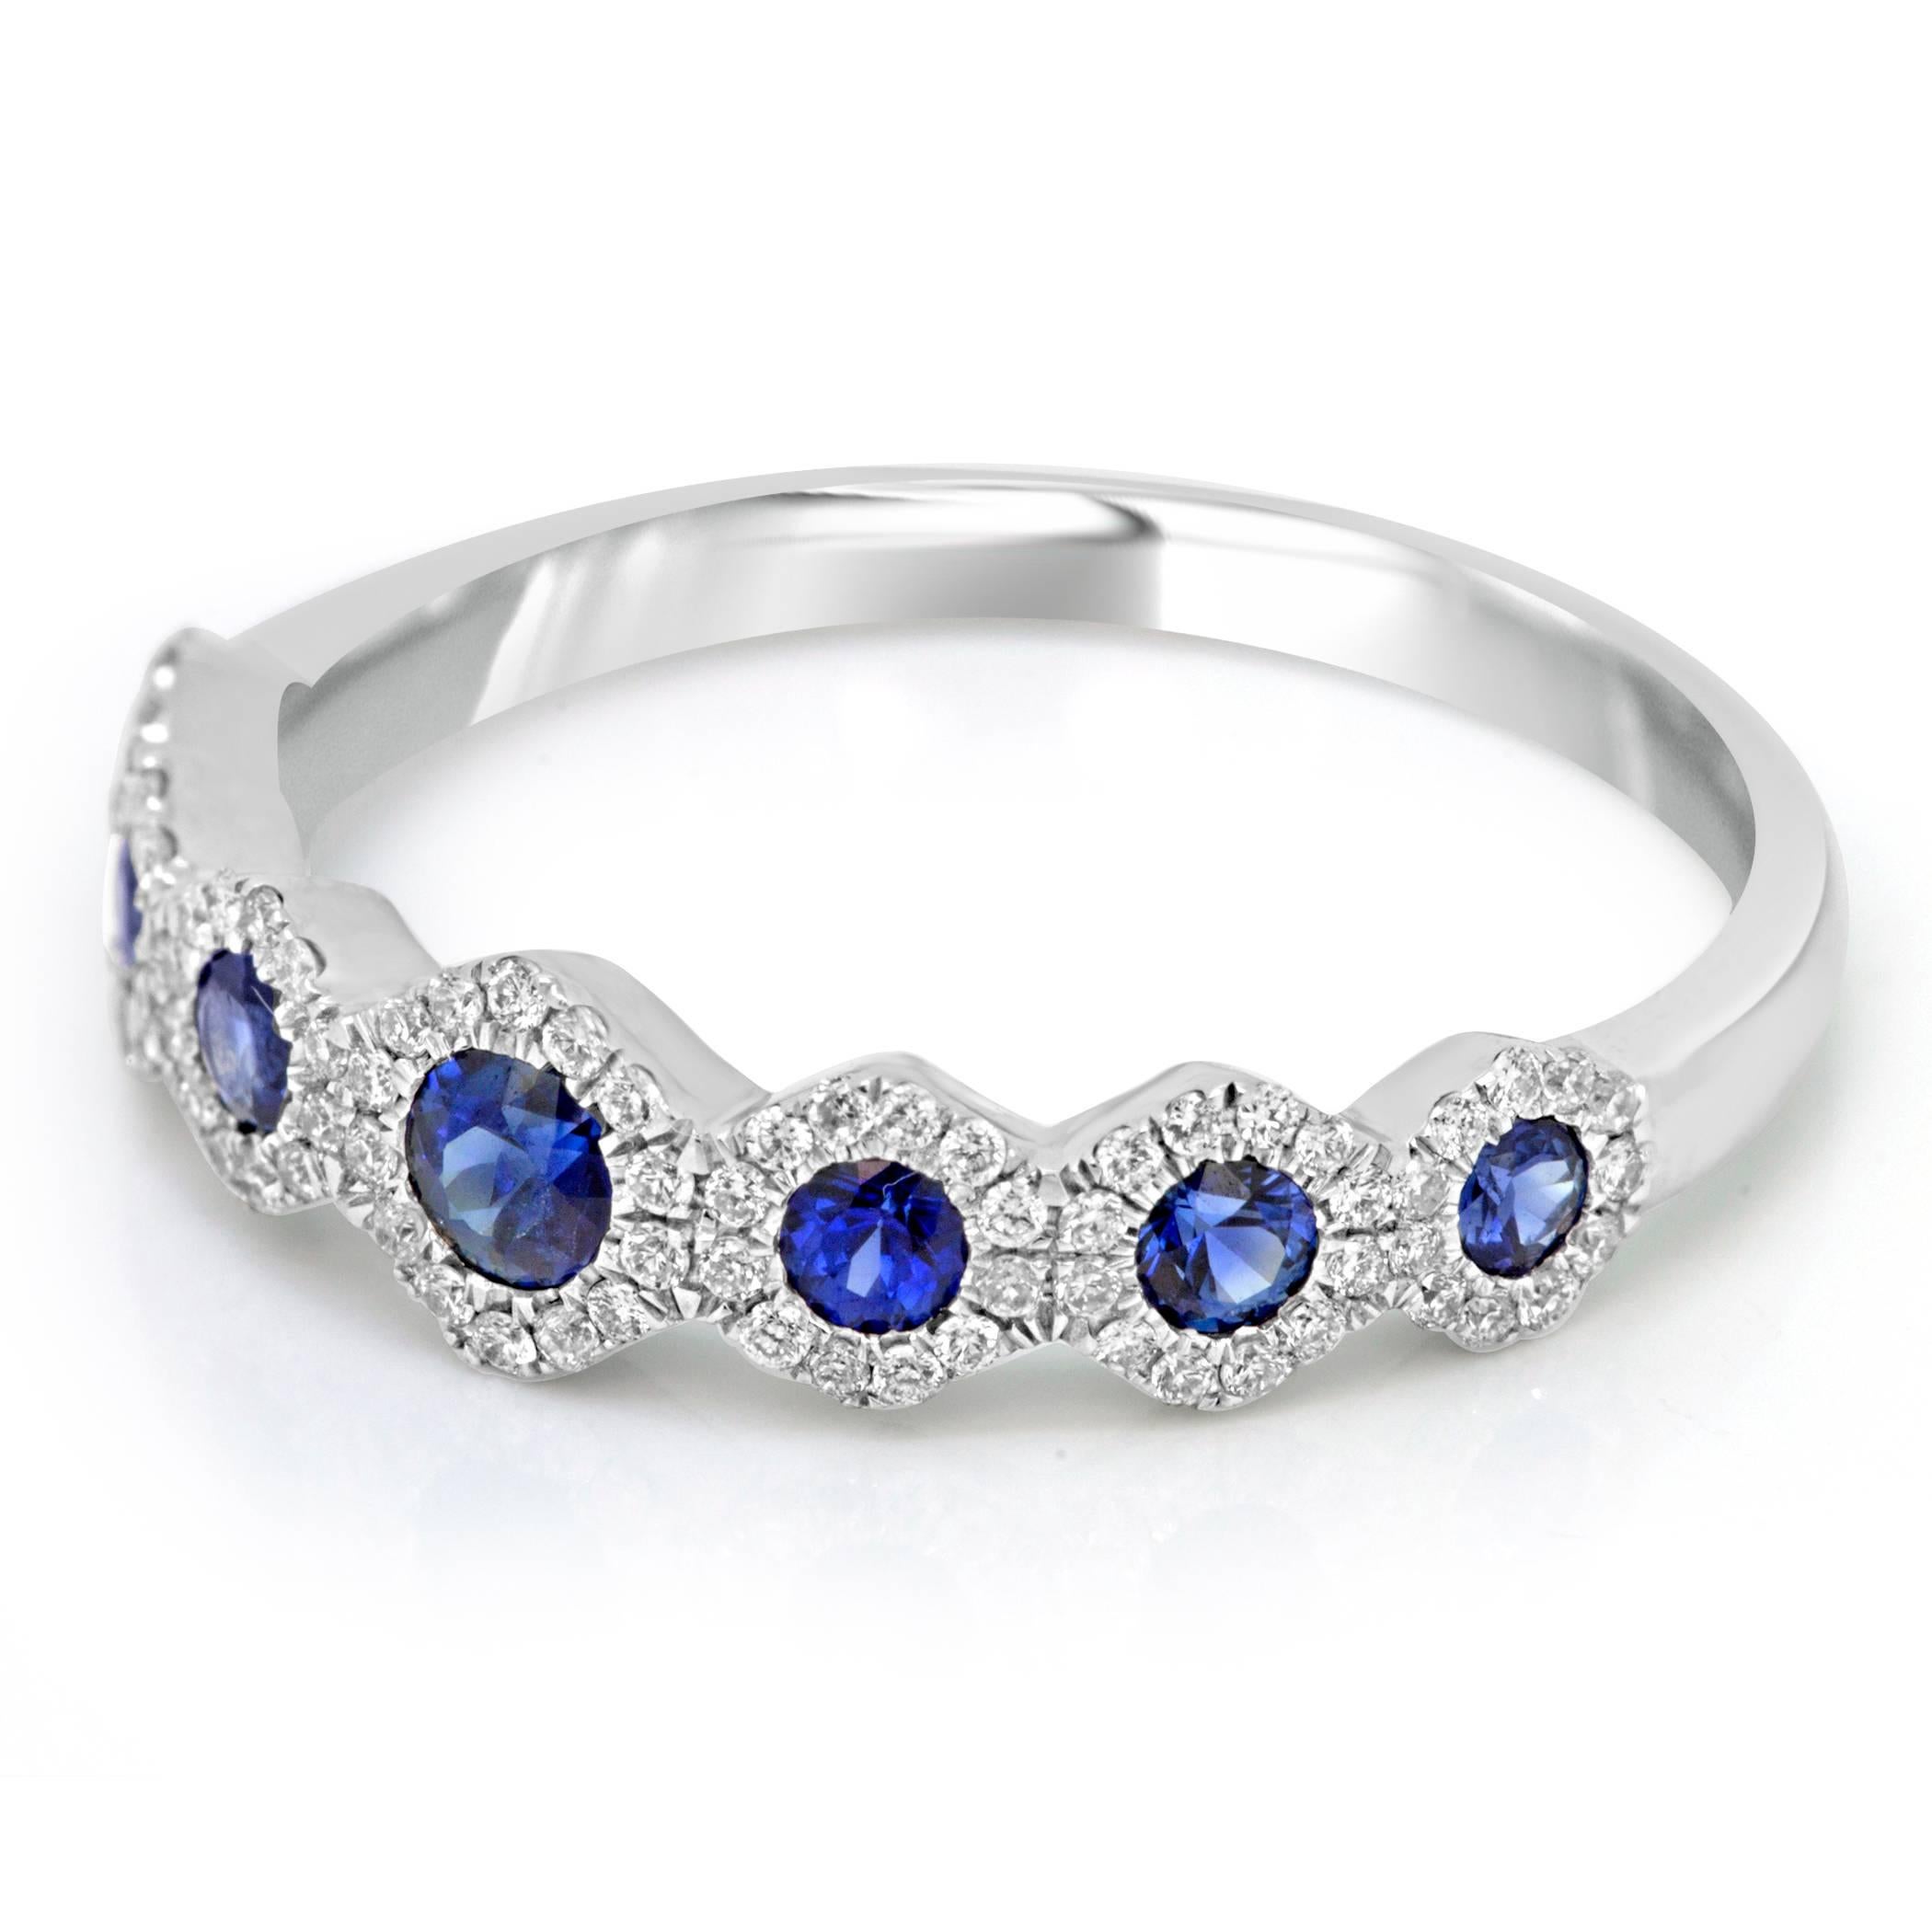 Blue sapphire round 0.62 Carat encircled in halo of white Round diamonds 0.43 Carat in 14K White gold everyday wear Stackable Fashion band ring.

Total Blue Sapphire Weight 0.62 Carat
Total Diamond Weight 0.43 Carat

Style available in different